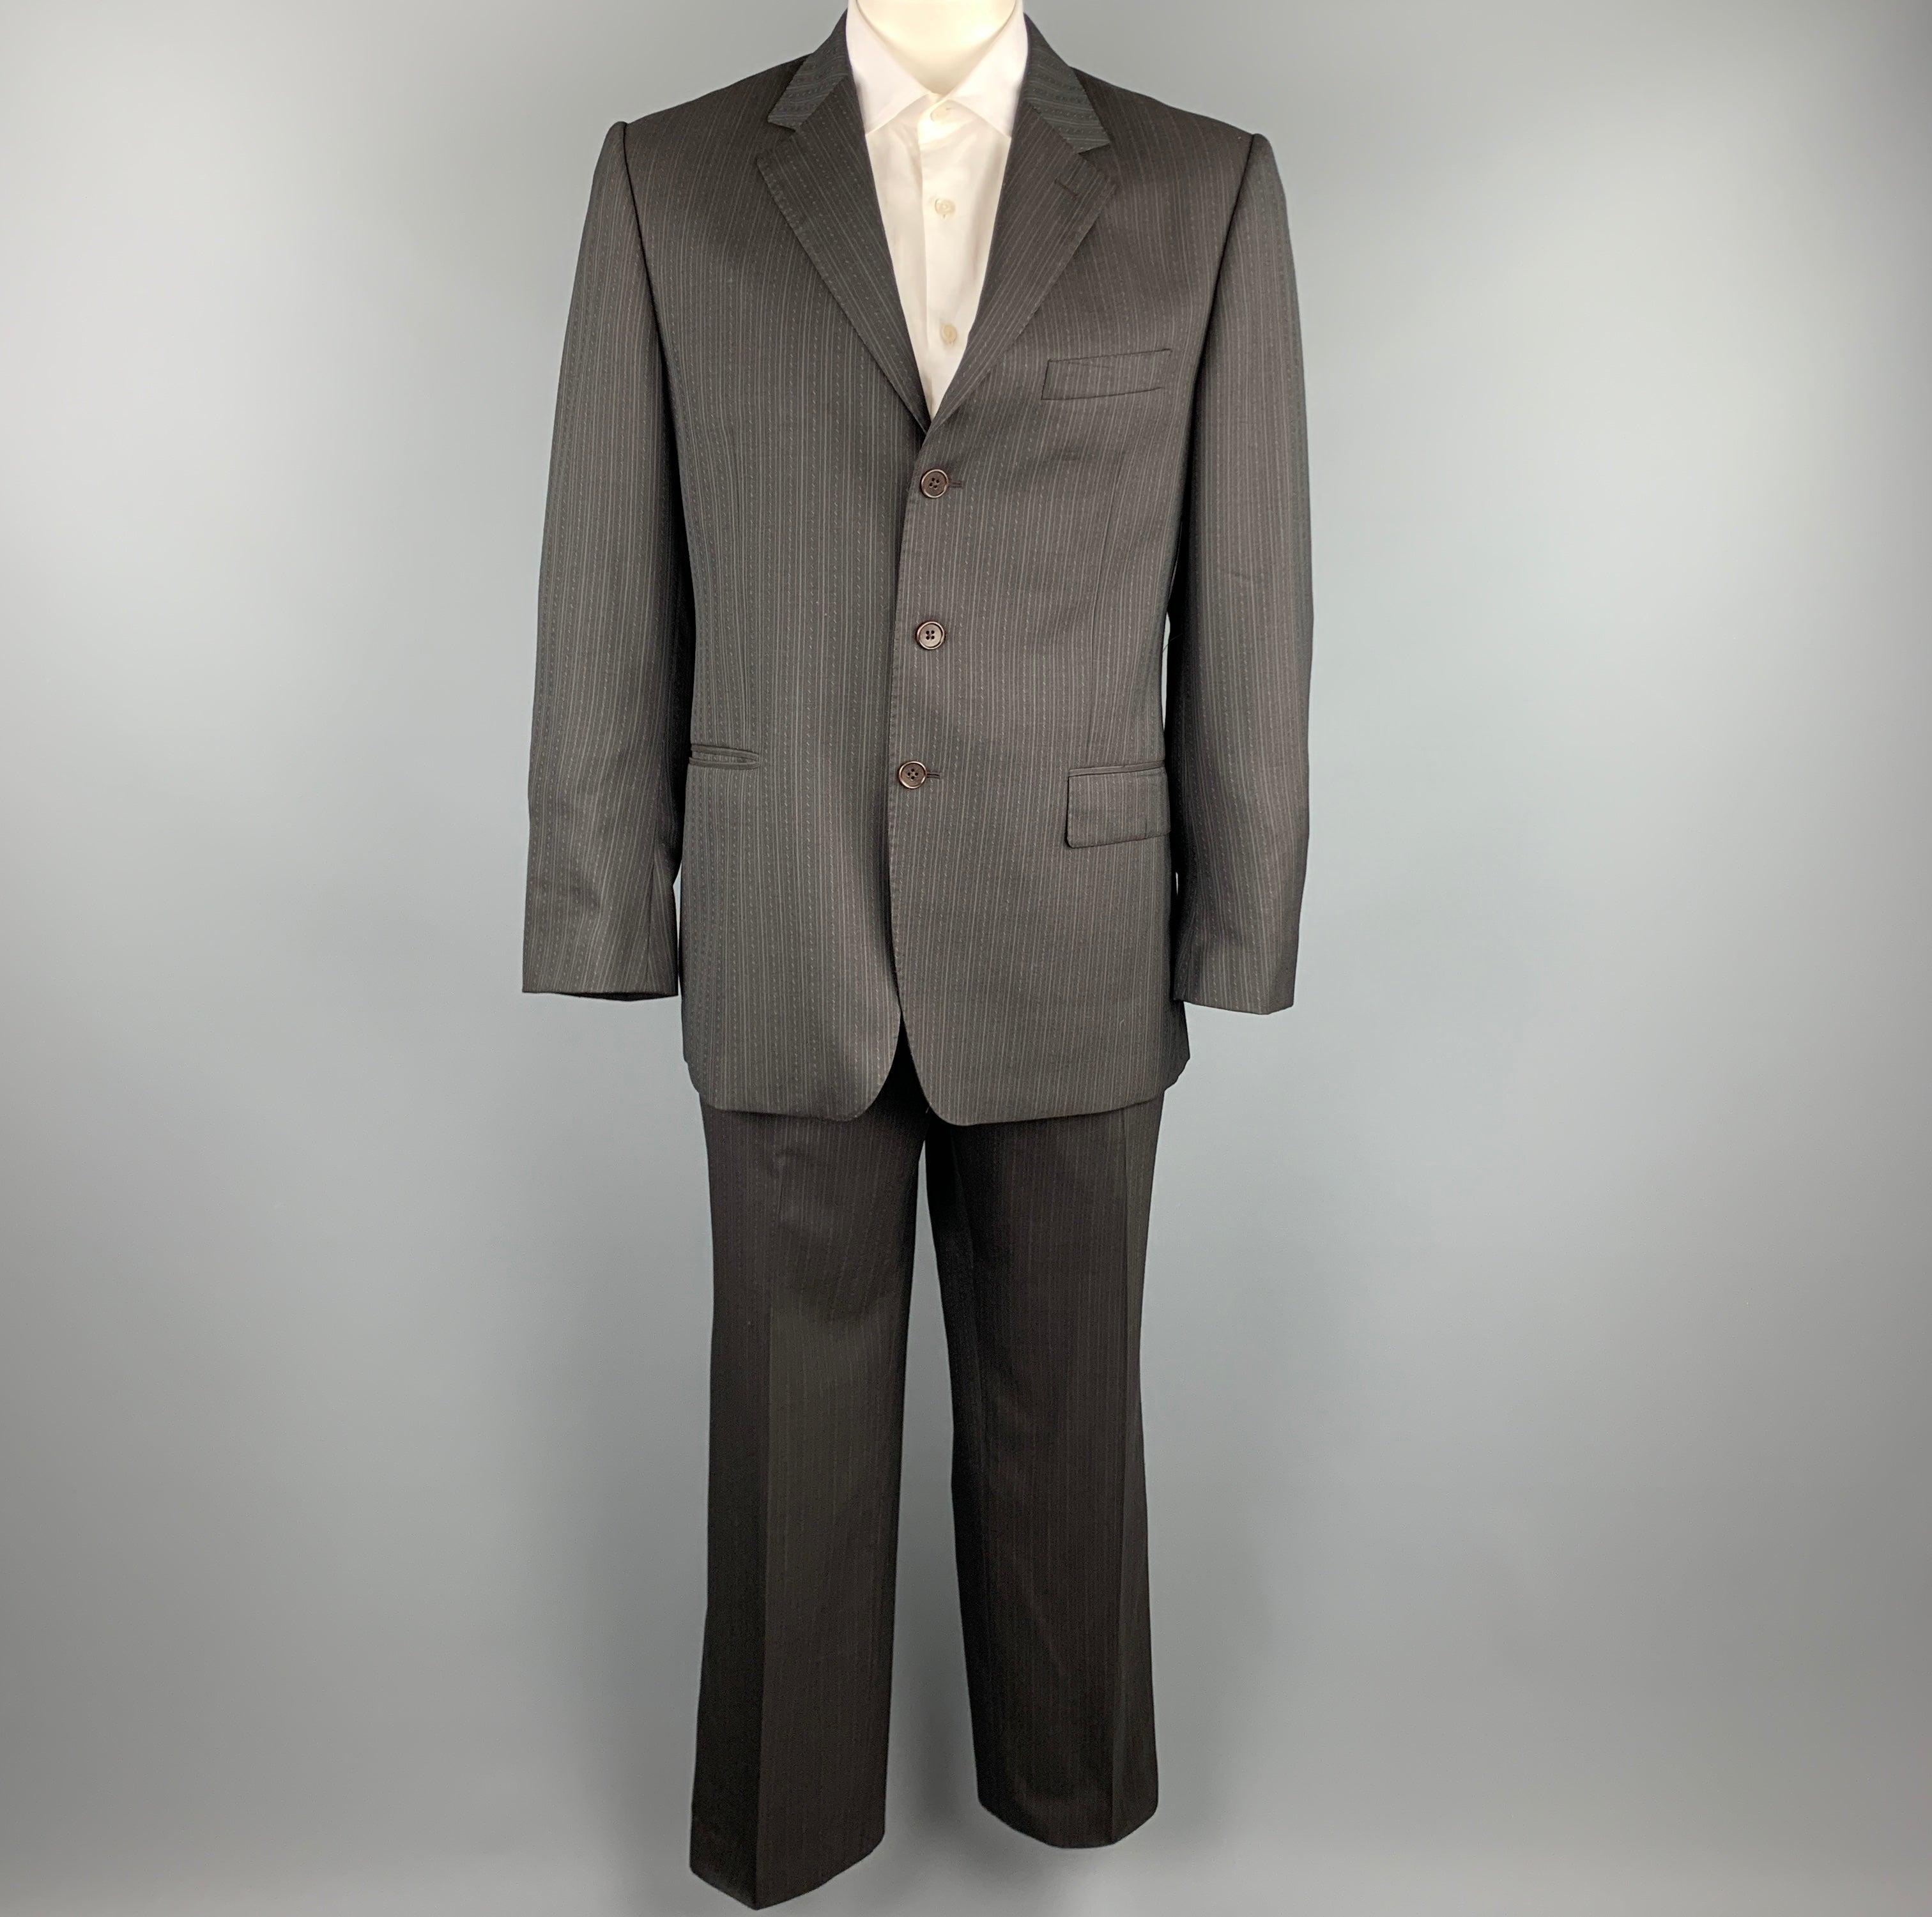 PAUL SMITH
suit comes in a brown stripe wool and includes a single breasted, three button sport coat with a notch lapel and matching flat front trousers. Made in Italy.Excellent Pre-Owned Condition. 

Marked:   42 R 

Measurements: 
 